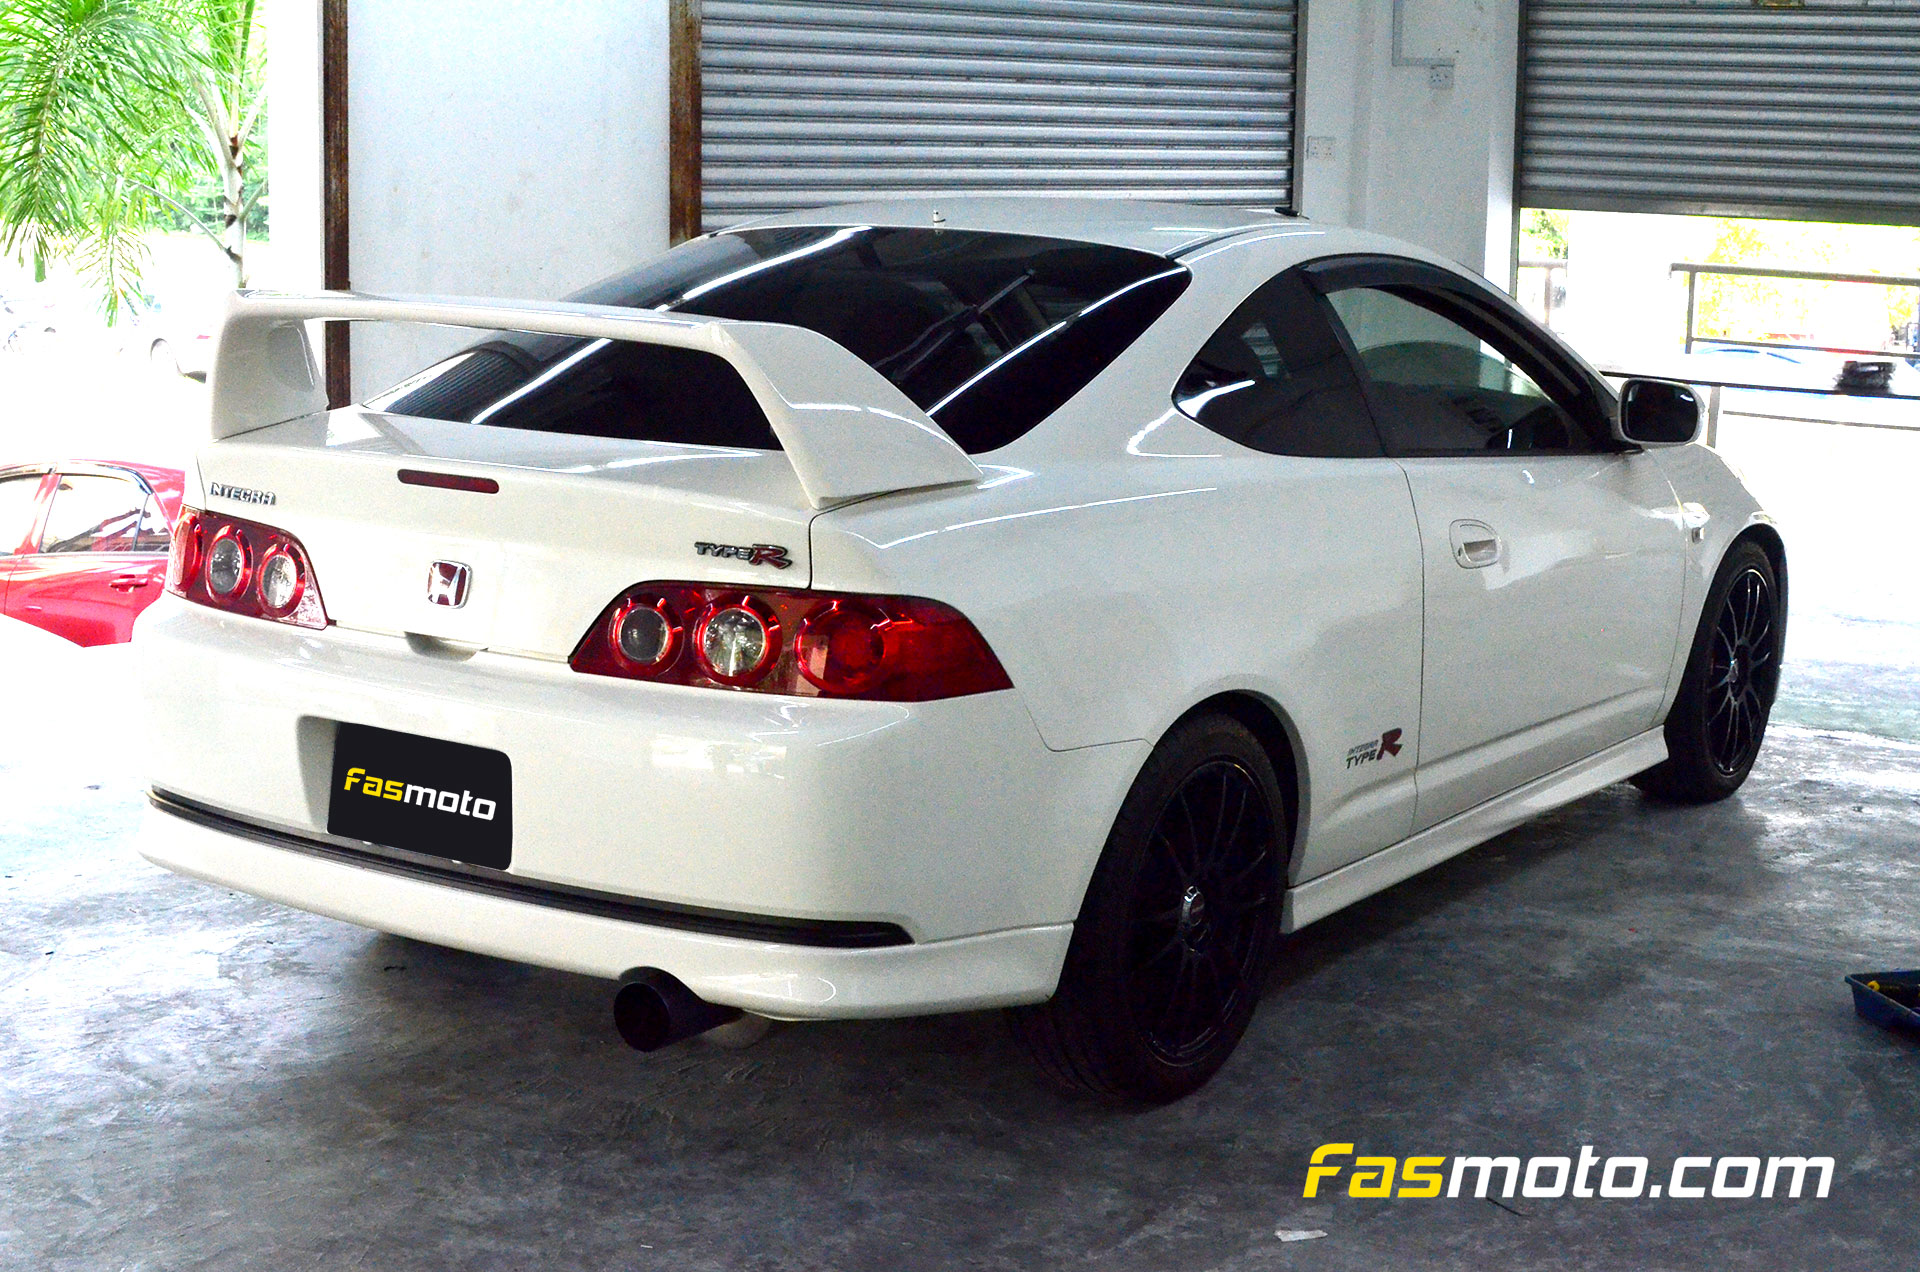 Shortof the tail end of the Type-R